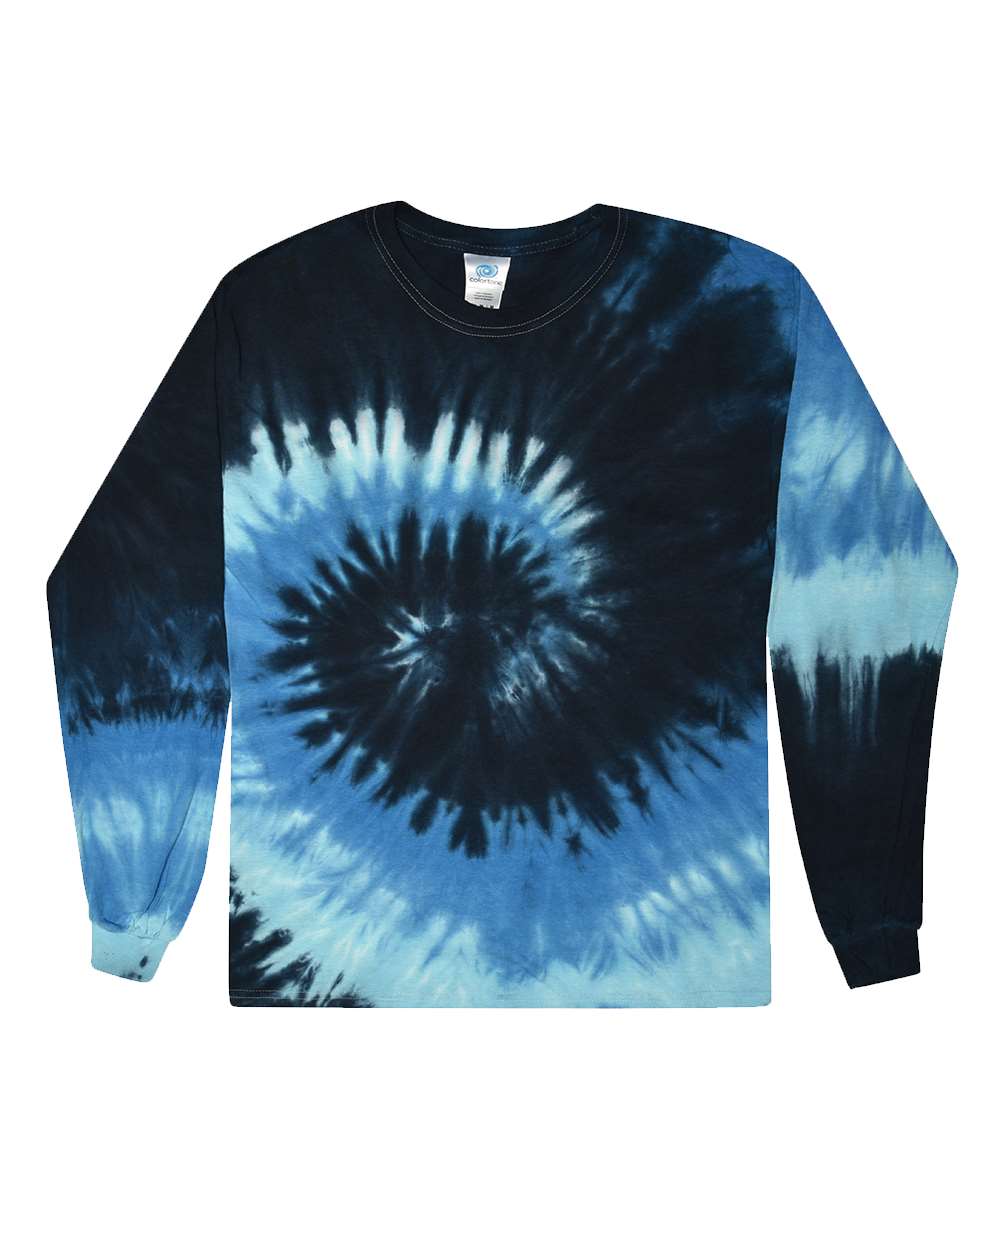 Adult Tie-dyed Long-sleeved T-shirt